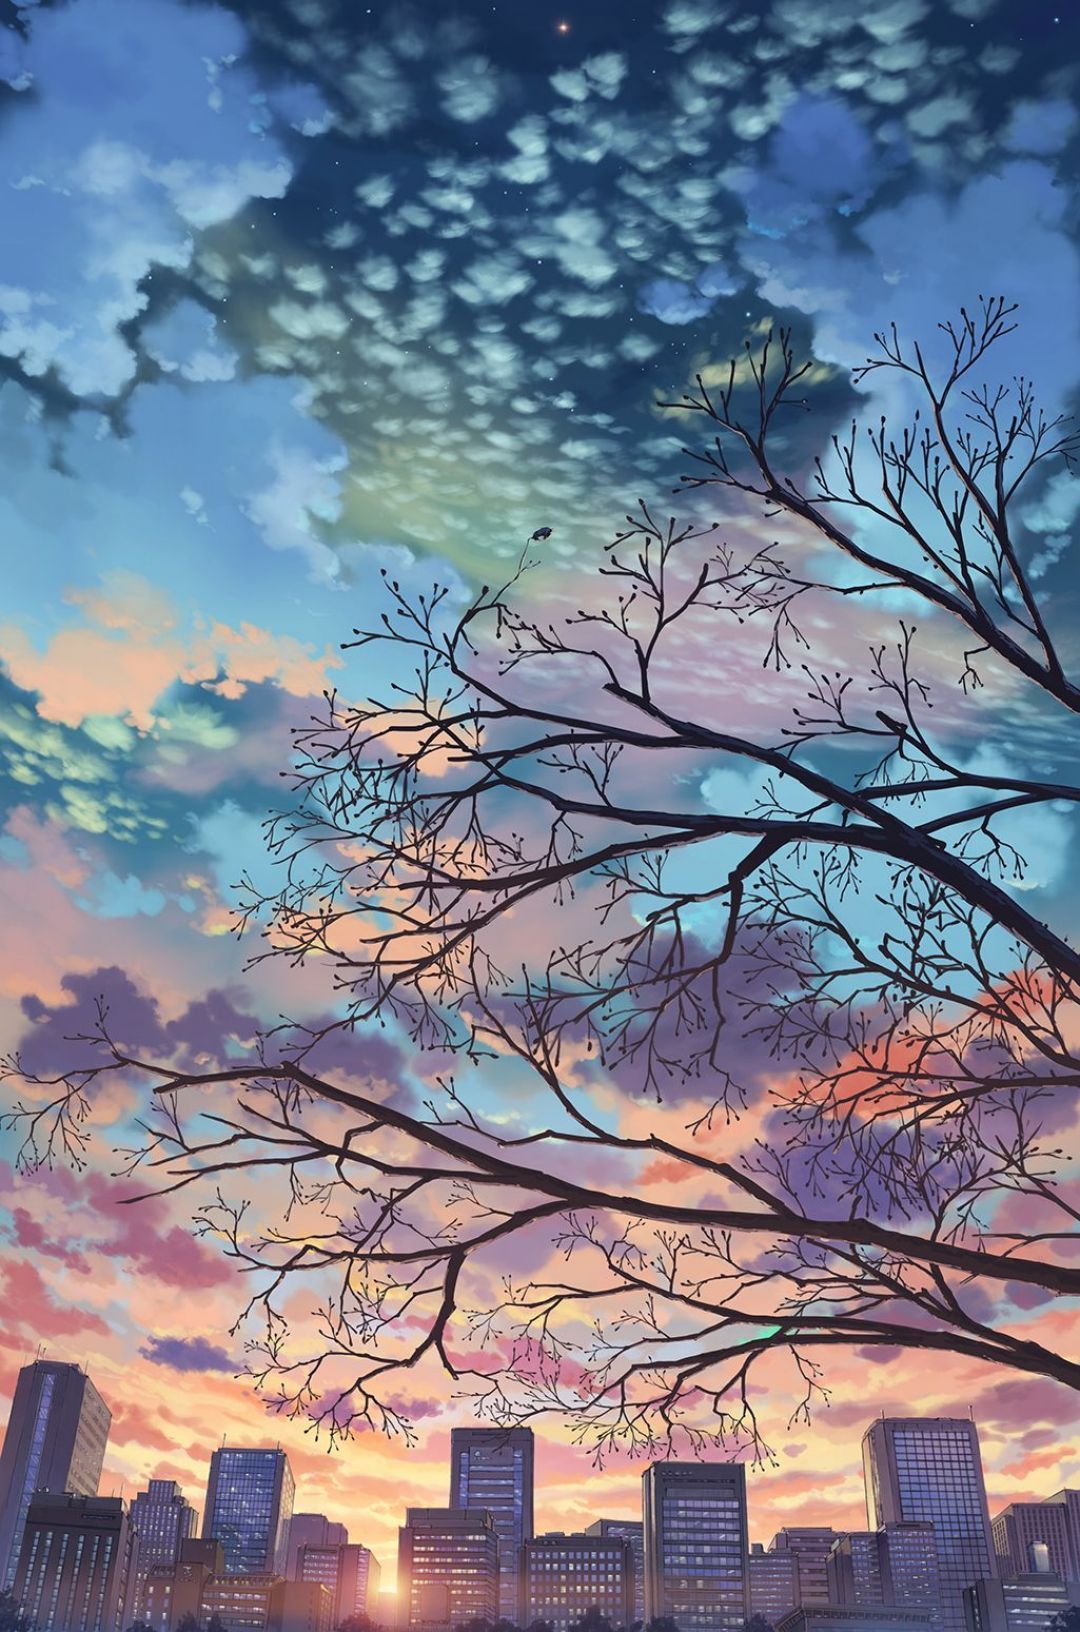 Anime Aesthetic Wallpaper Hd Aesthetic Wallpapers 78 Images Aesthetic